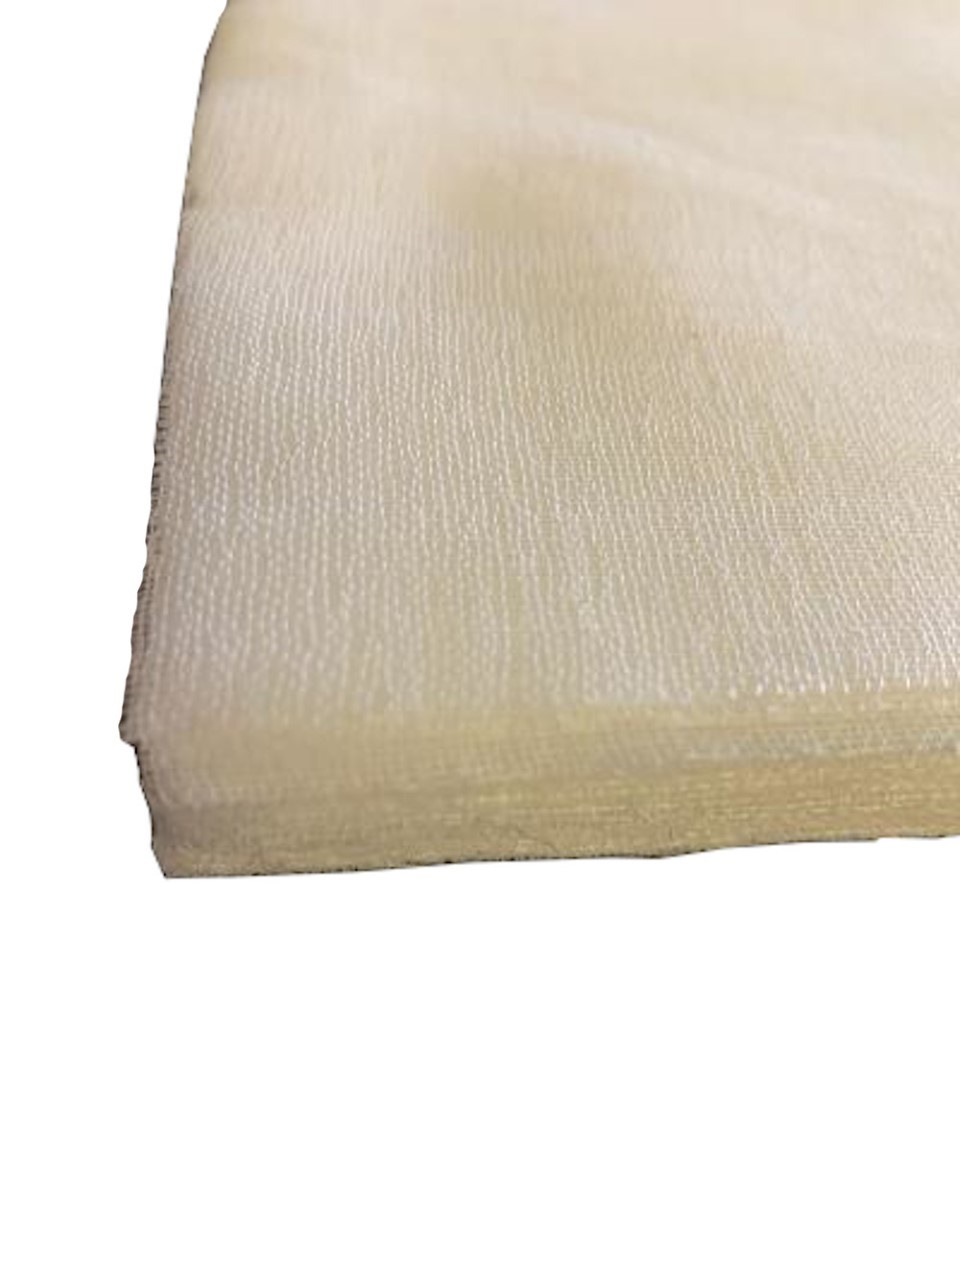 Grade 90 Cheesecloth 24" x 24" Squares (100 Pack)